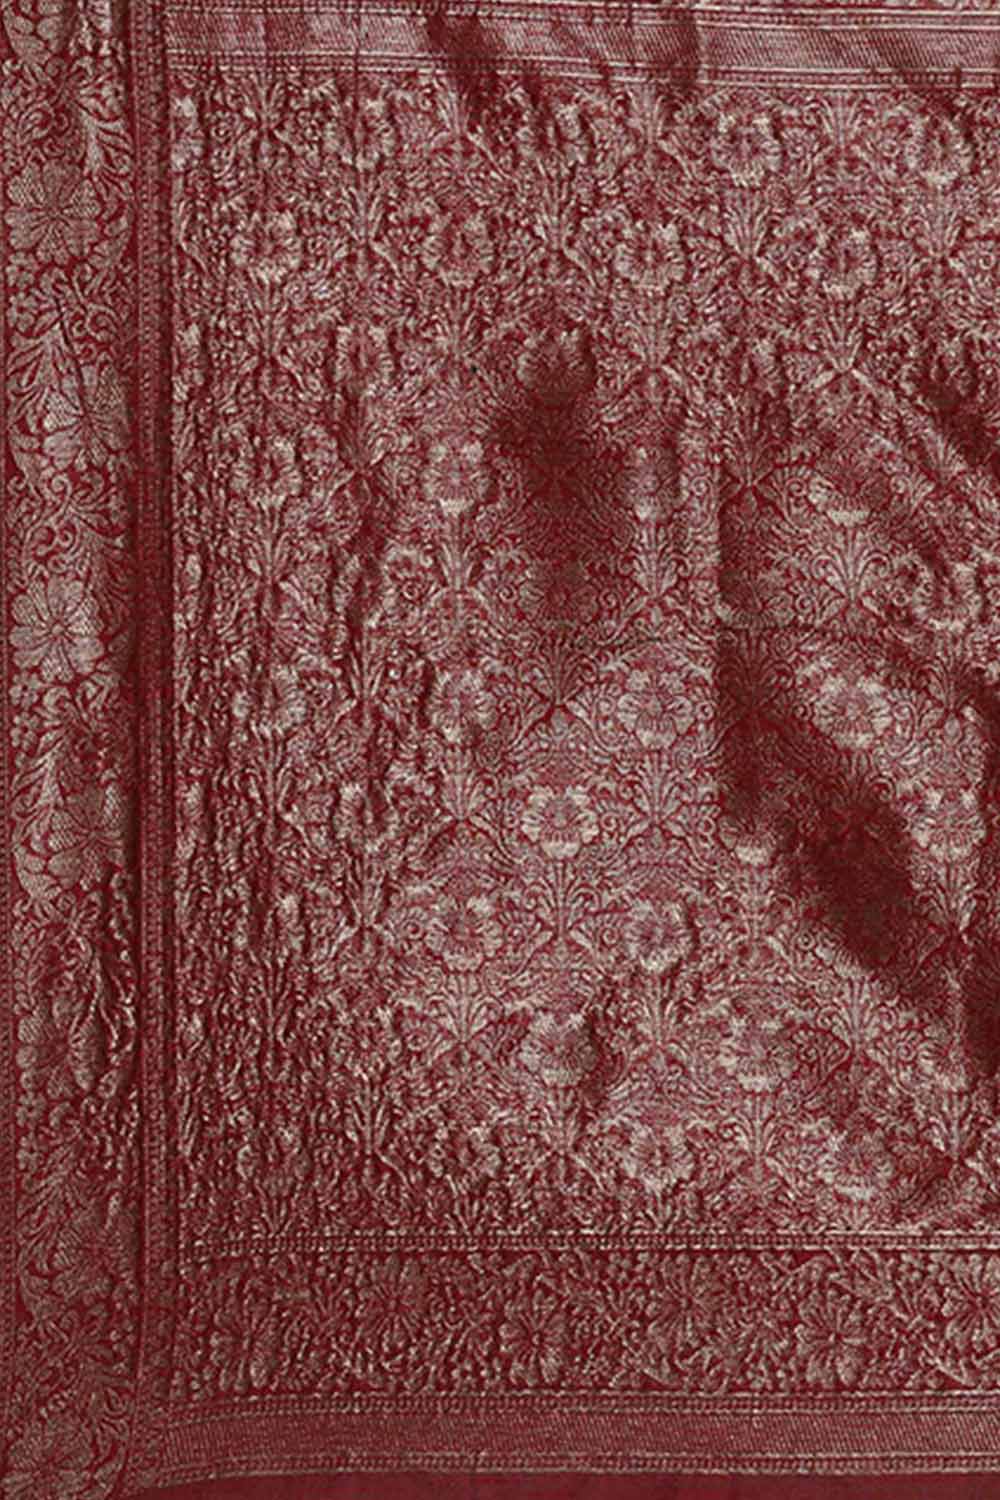 Linen Floral Woven Saree In Maroon